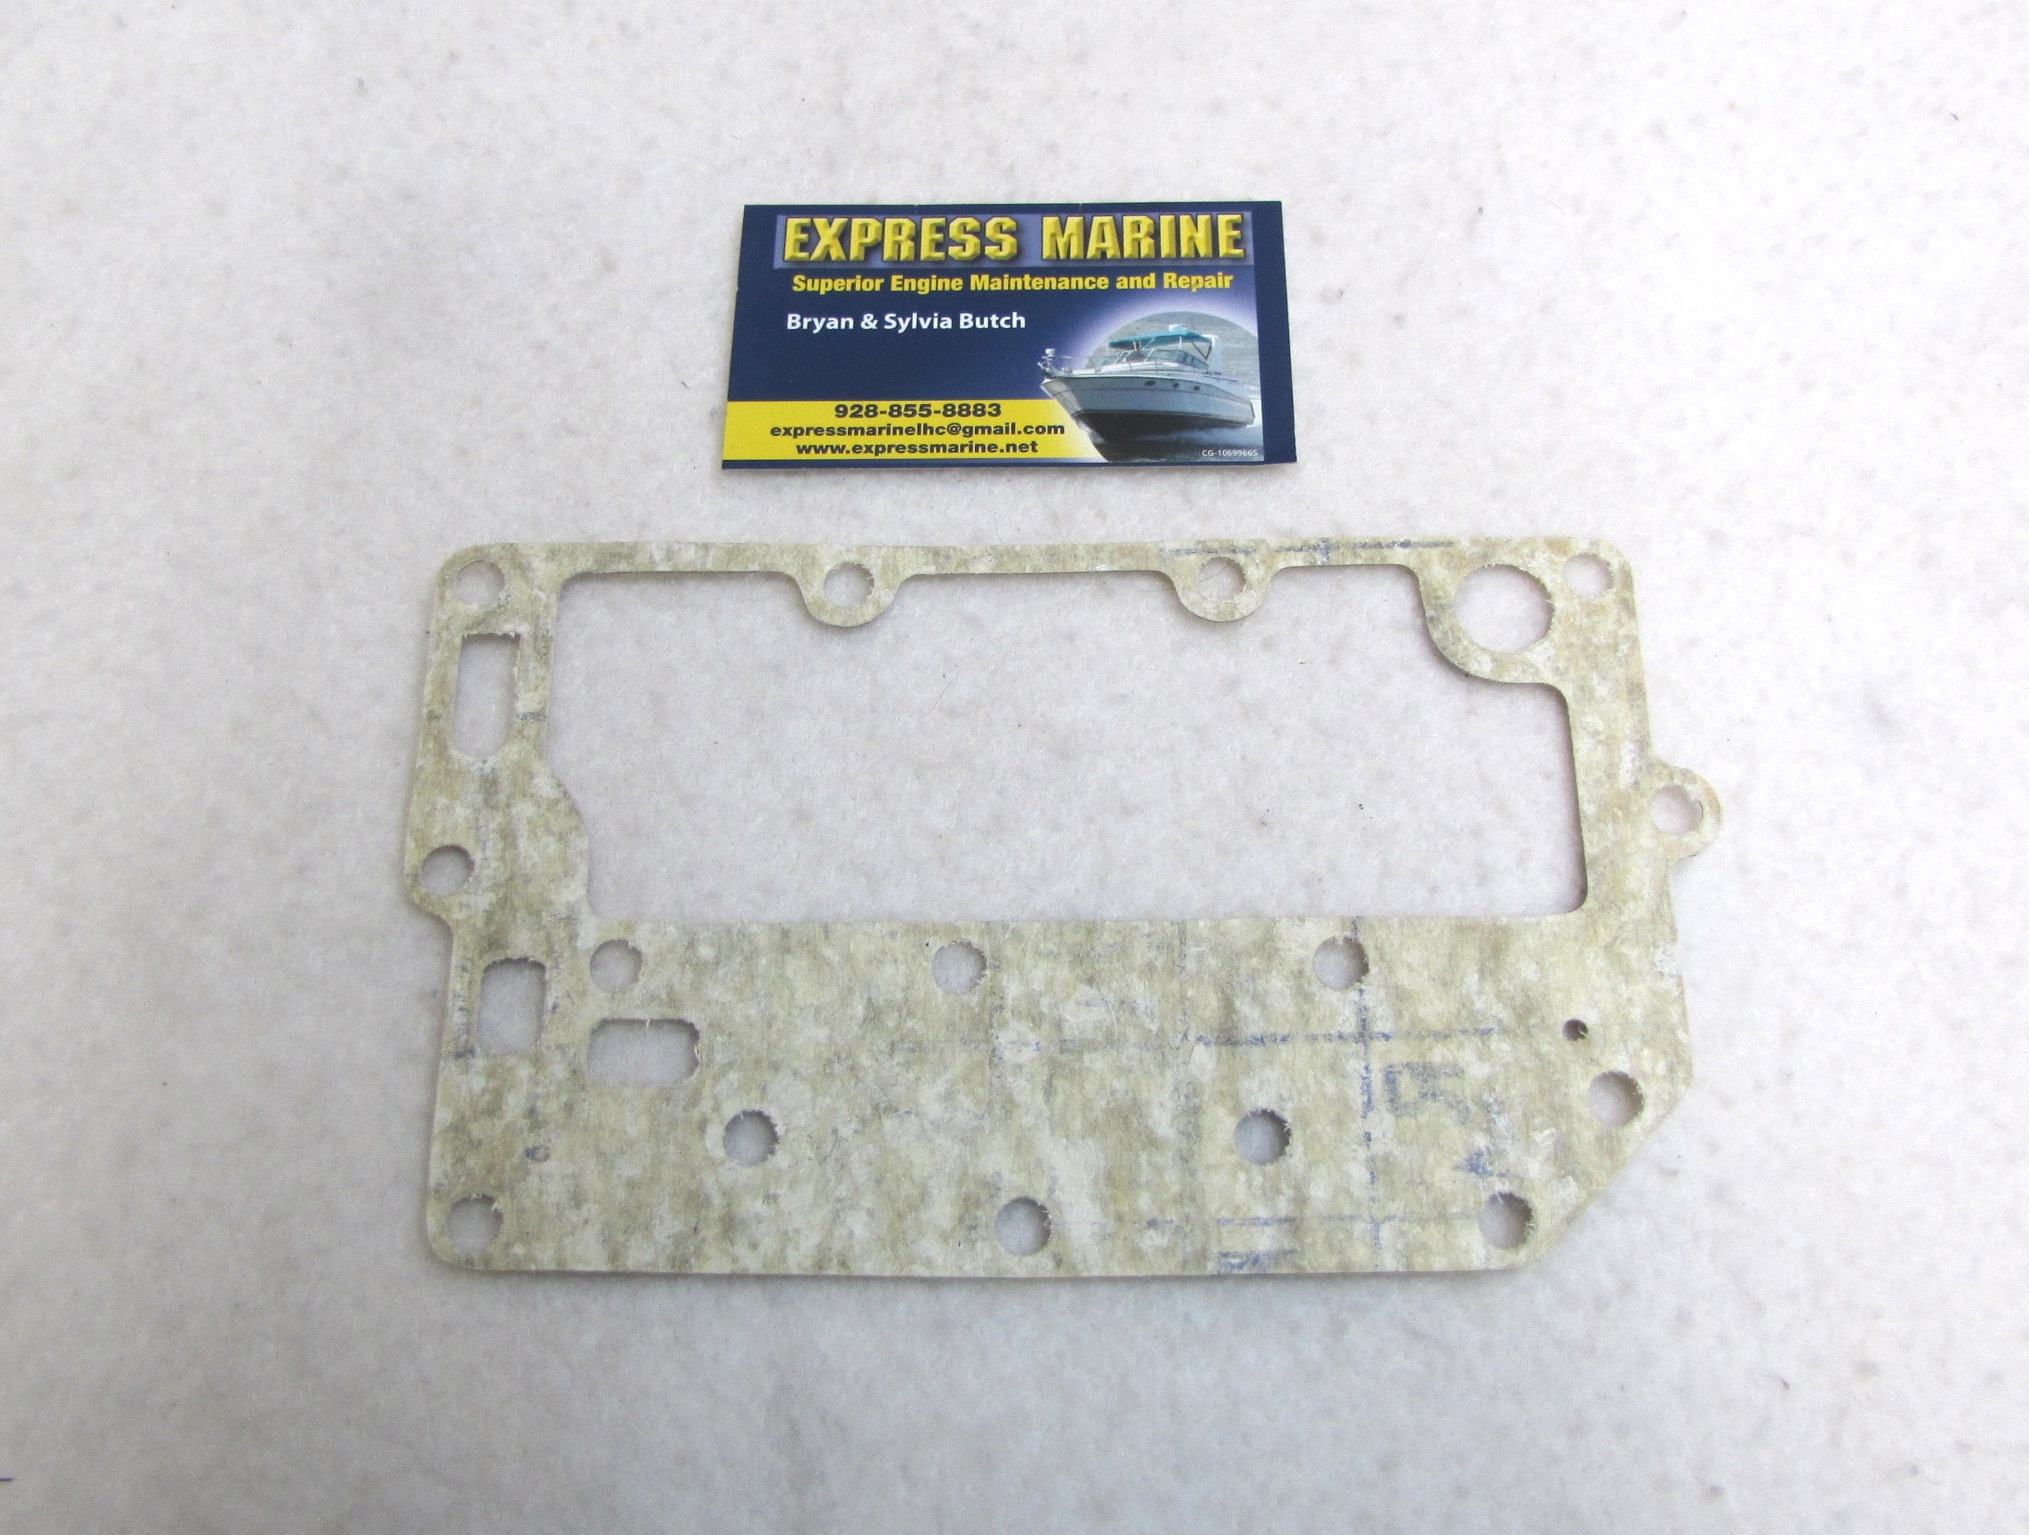 0324323 WSM Johnson Evinrude 20-35 Hp Outer Exhaust Cover Gasket 520-26 